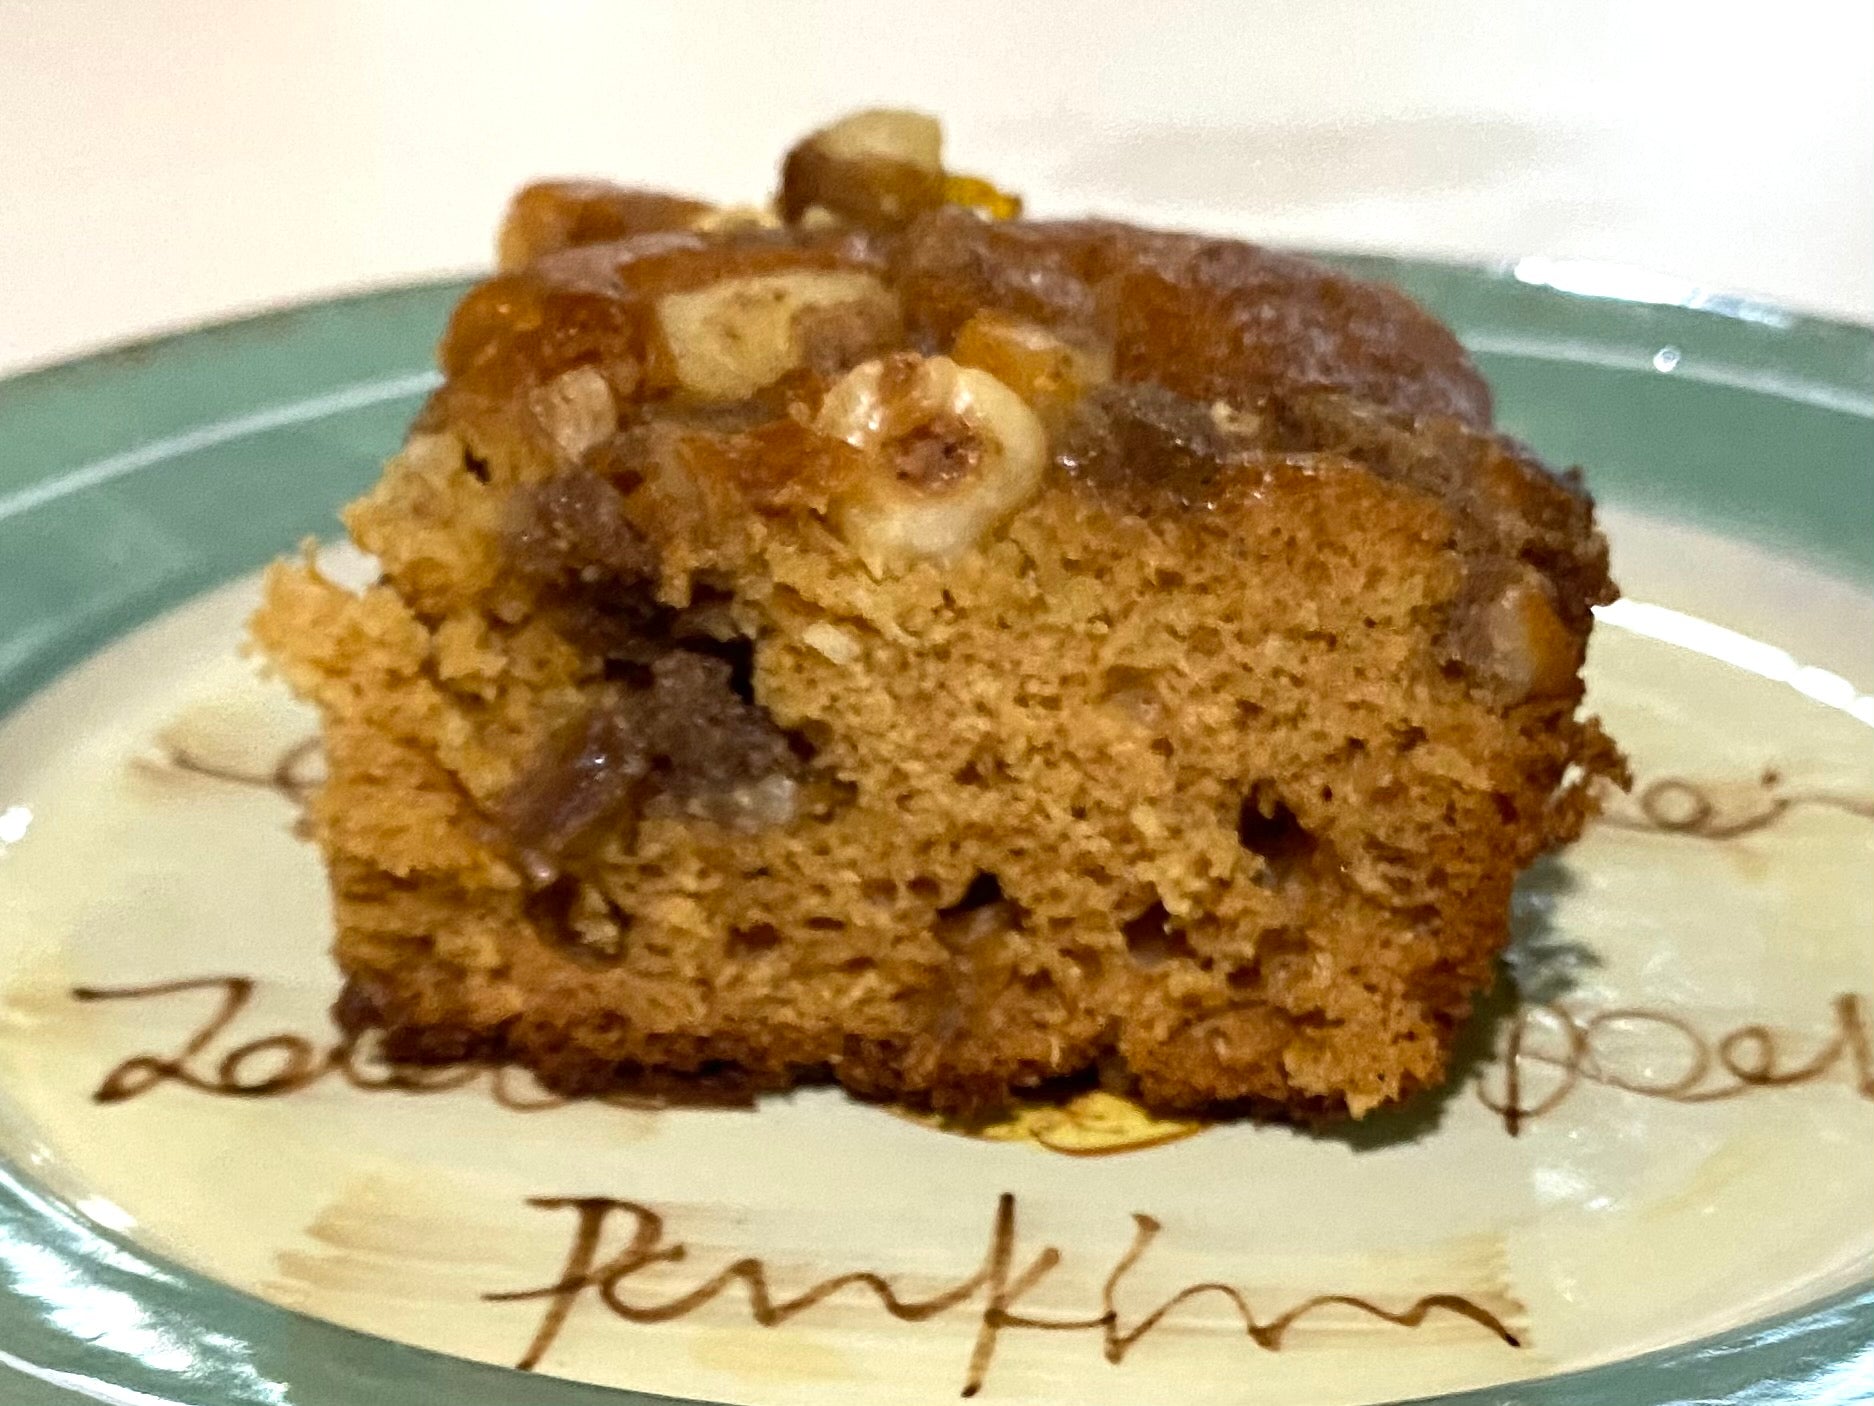 Honey Coffeecake with Macadamia Nut Streusel for Easter Morning